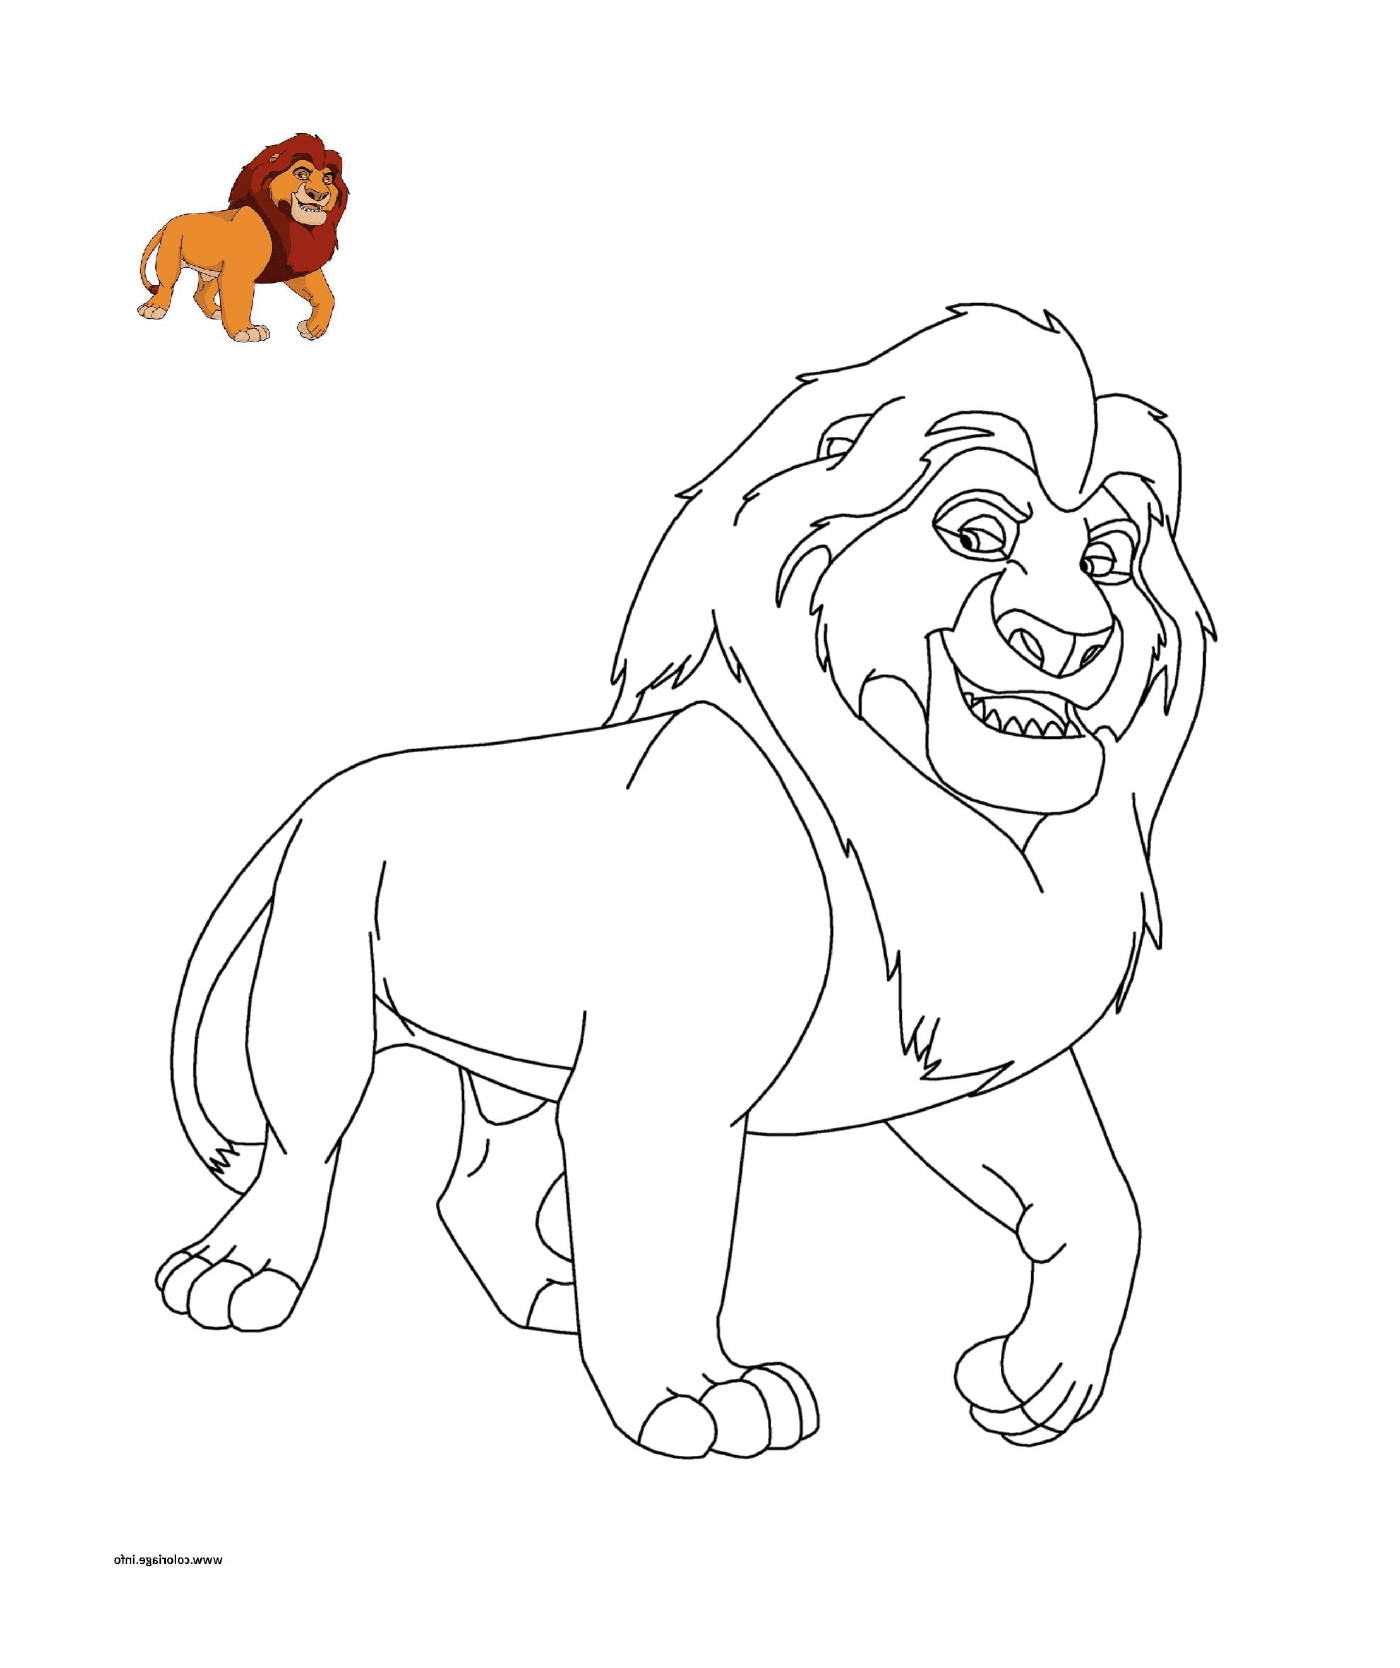  Disney Lion King with a lion next to another animal 